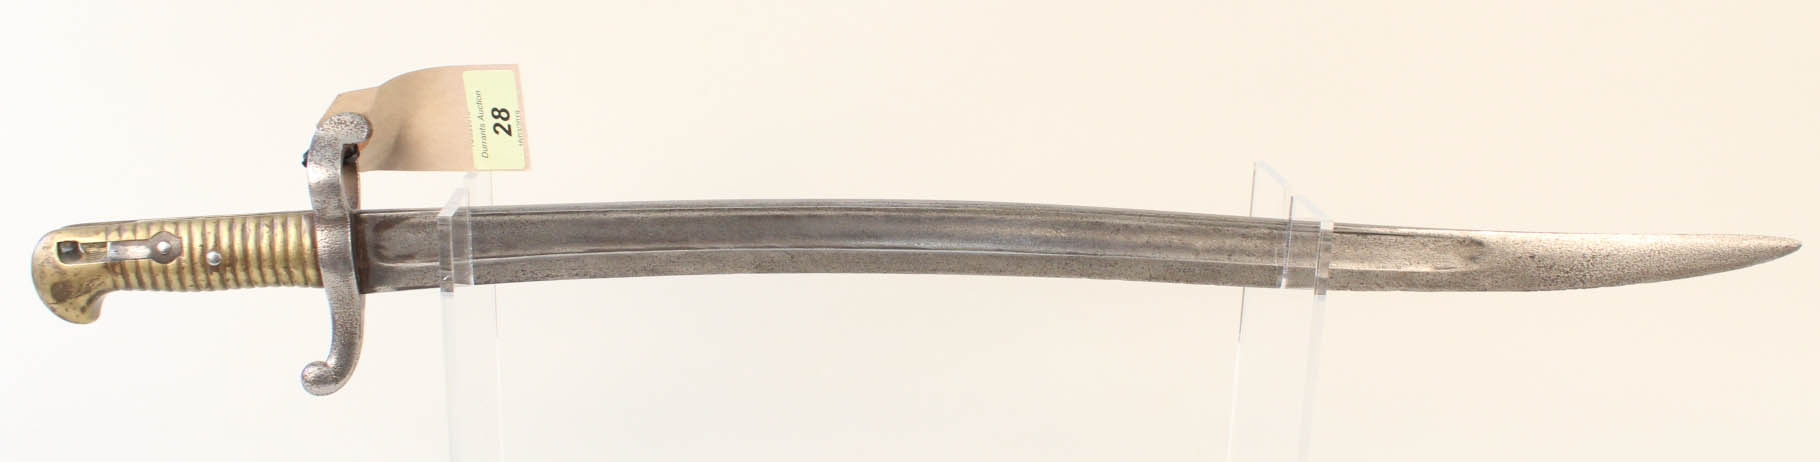 A French model 1842 sabre bayonet (no scabbard and press stud missing)